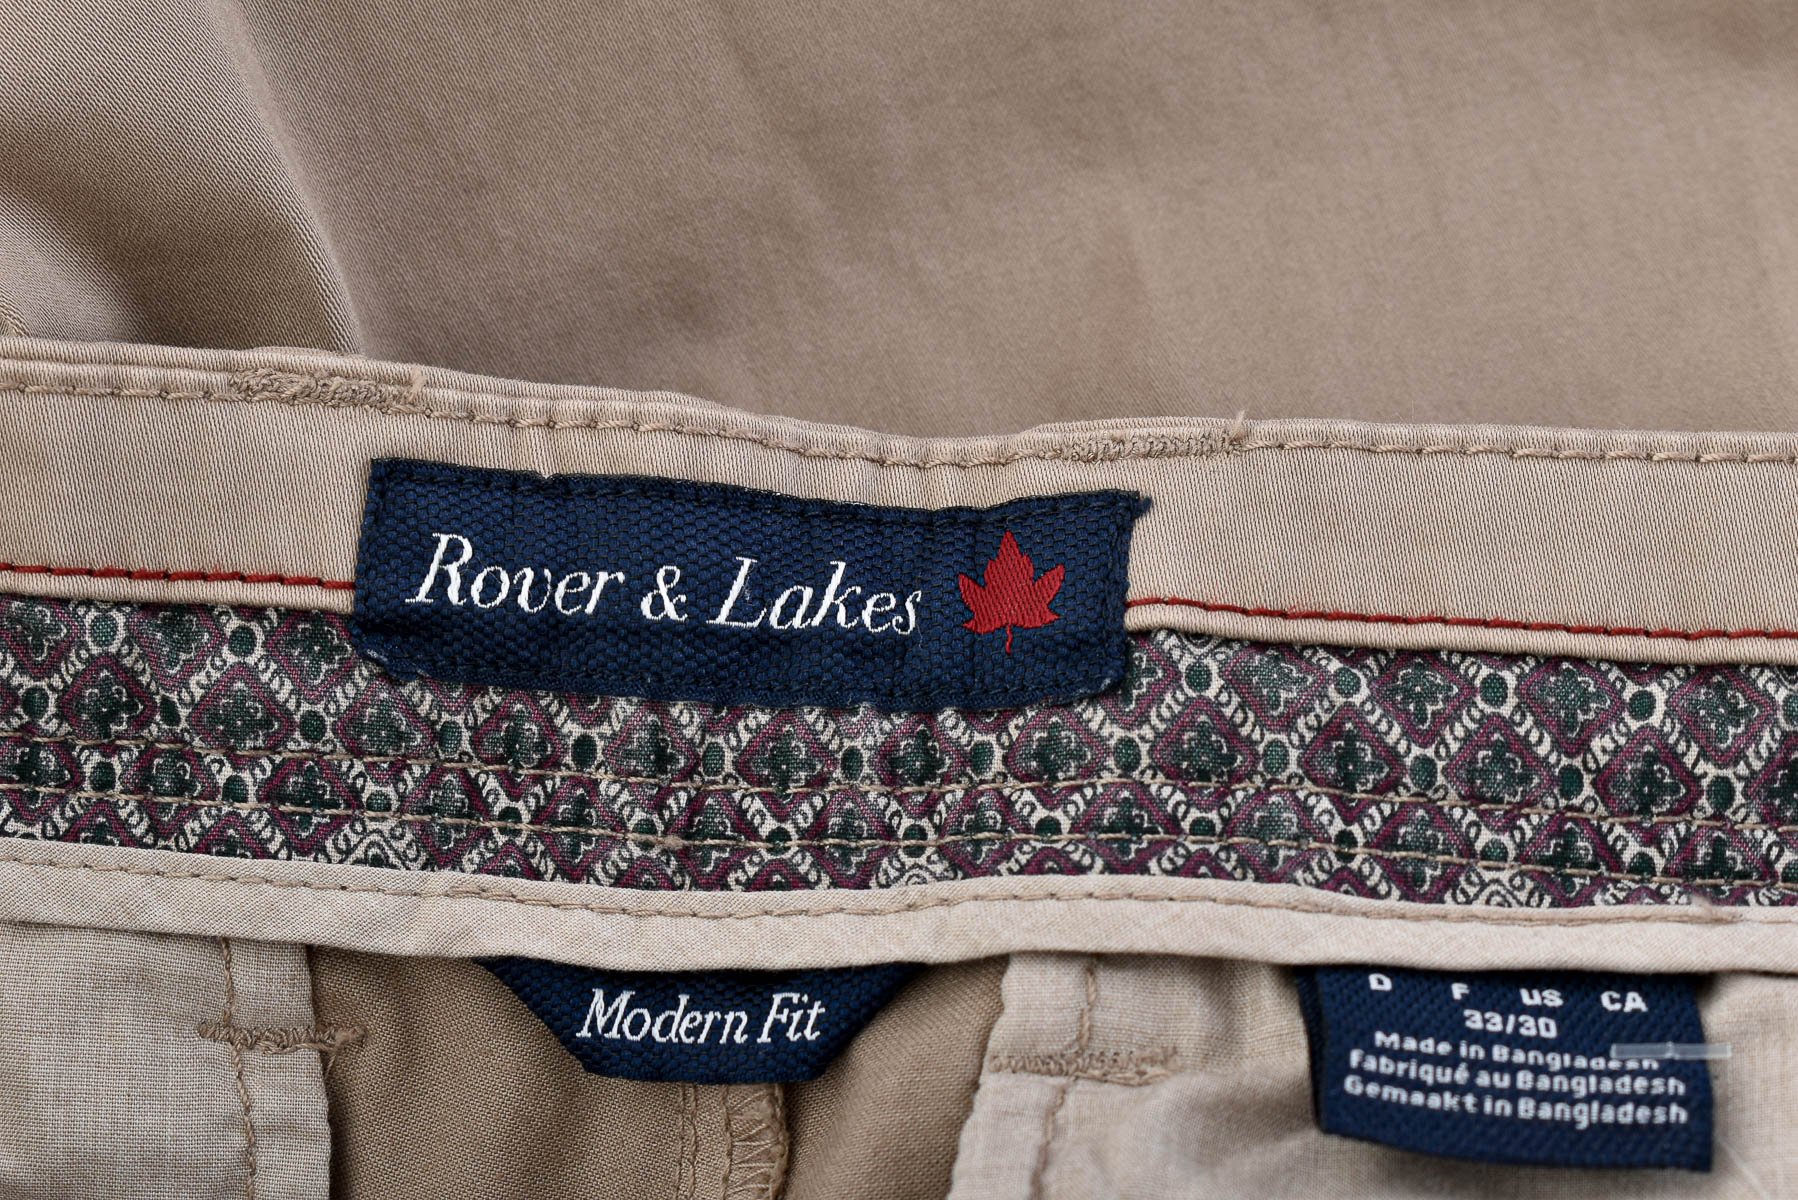 Men's trousers - Rover & Lakes - 2